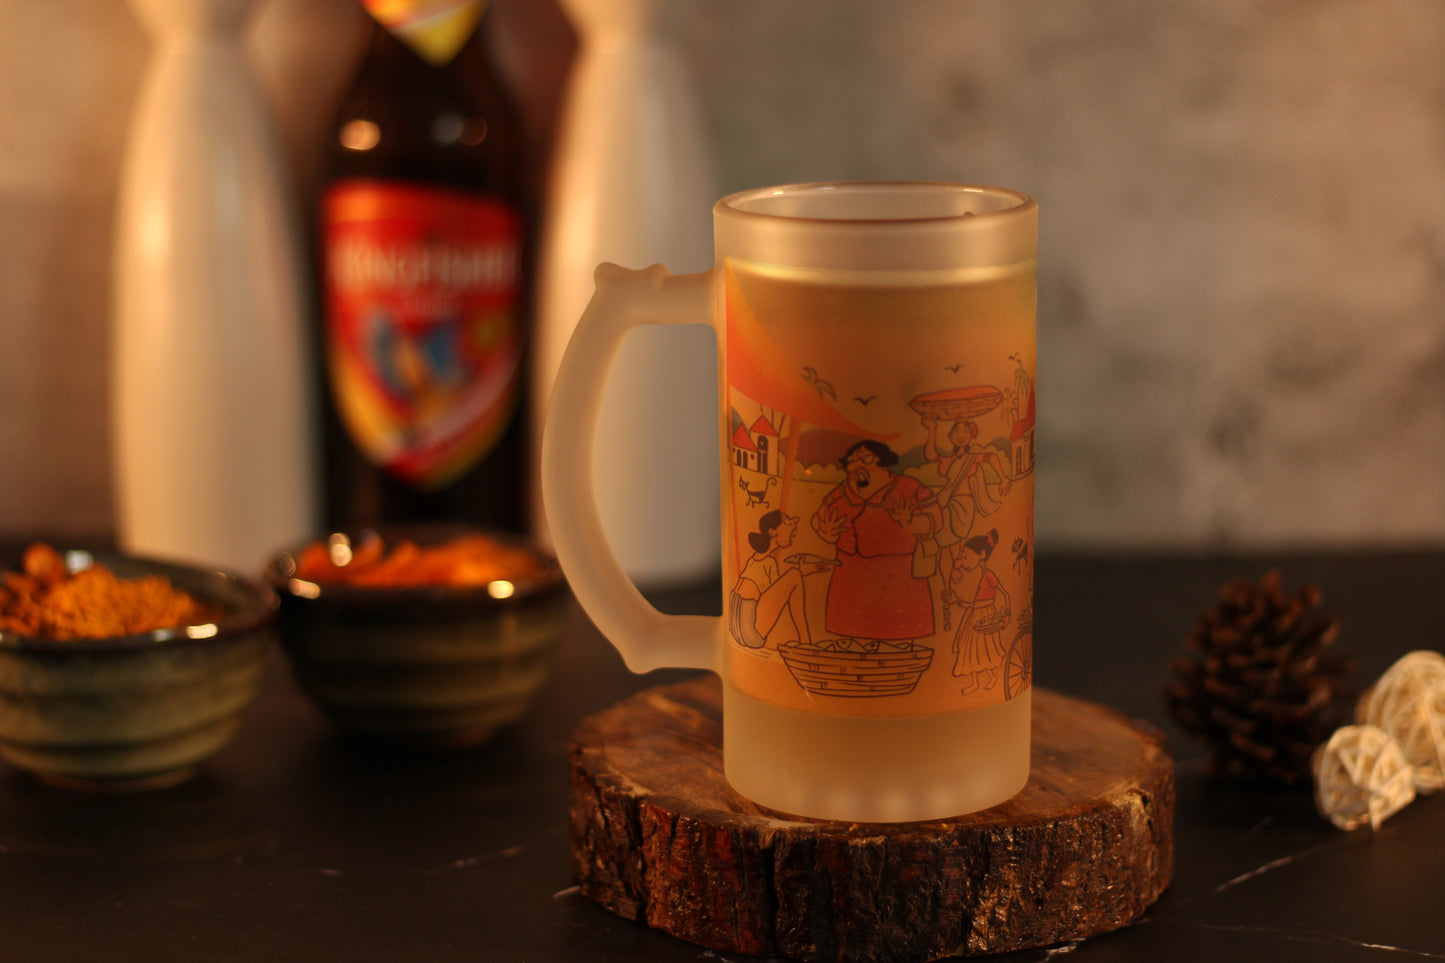 “I Would Kill Everyone In This Room For A Drop of Sweet Beer.” Glass Beer Mug